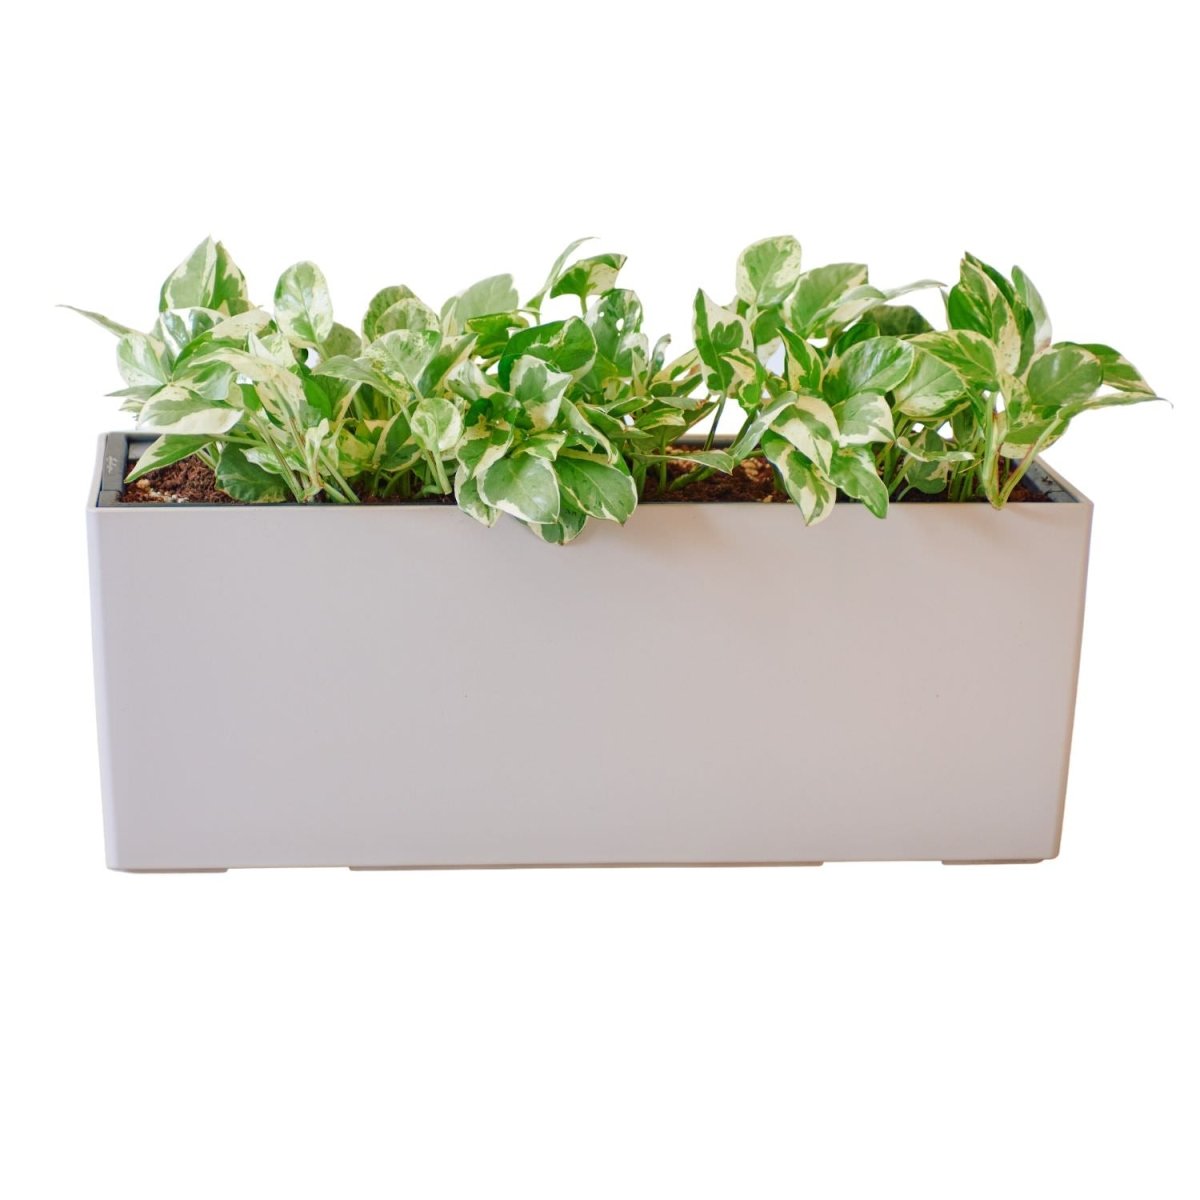 Pothos Pearls And Jade Potted In Lechuza Balconera Planter - Sand Brown - My City Plants